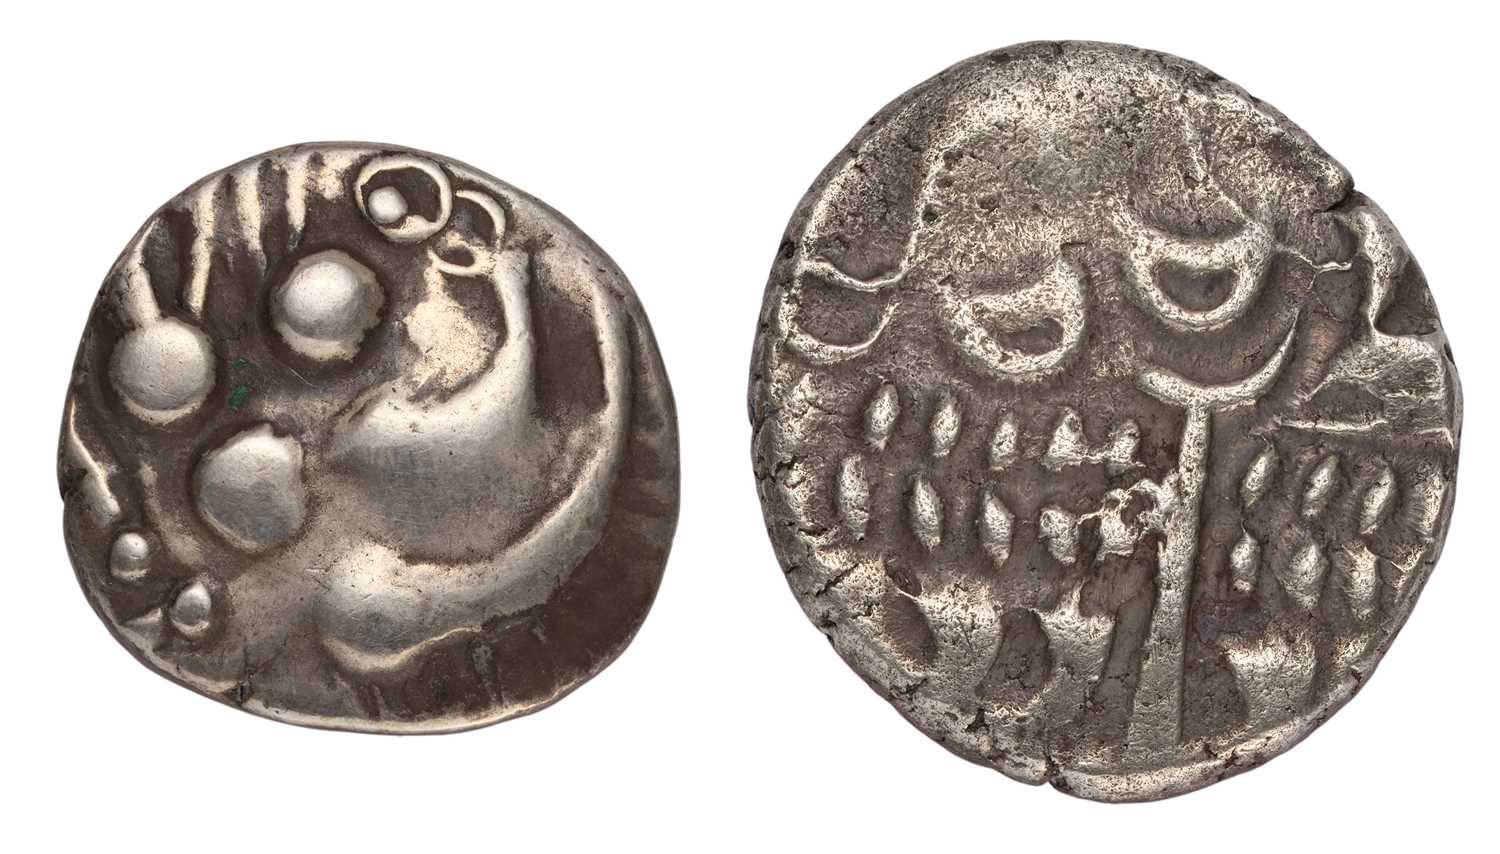 Celtic Silver Stater, Durotriges, spread tail, c.58-45BC, 4.07g, obv. Durotrigan wreath pattern,